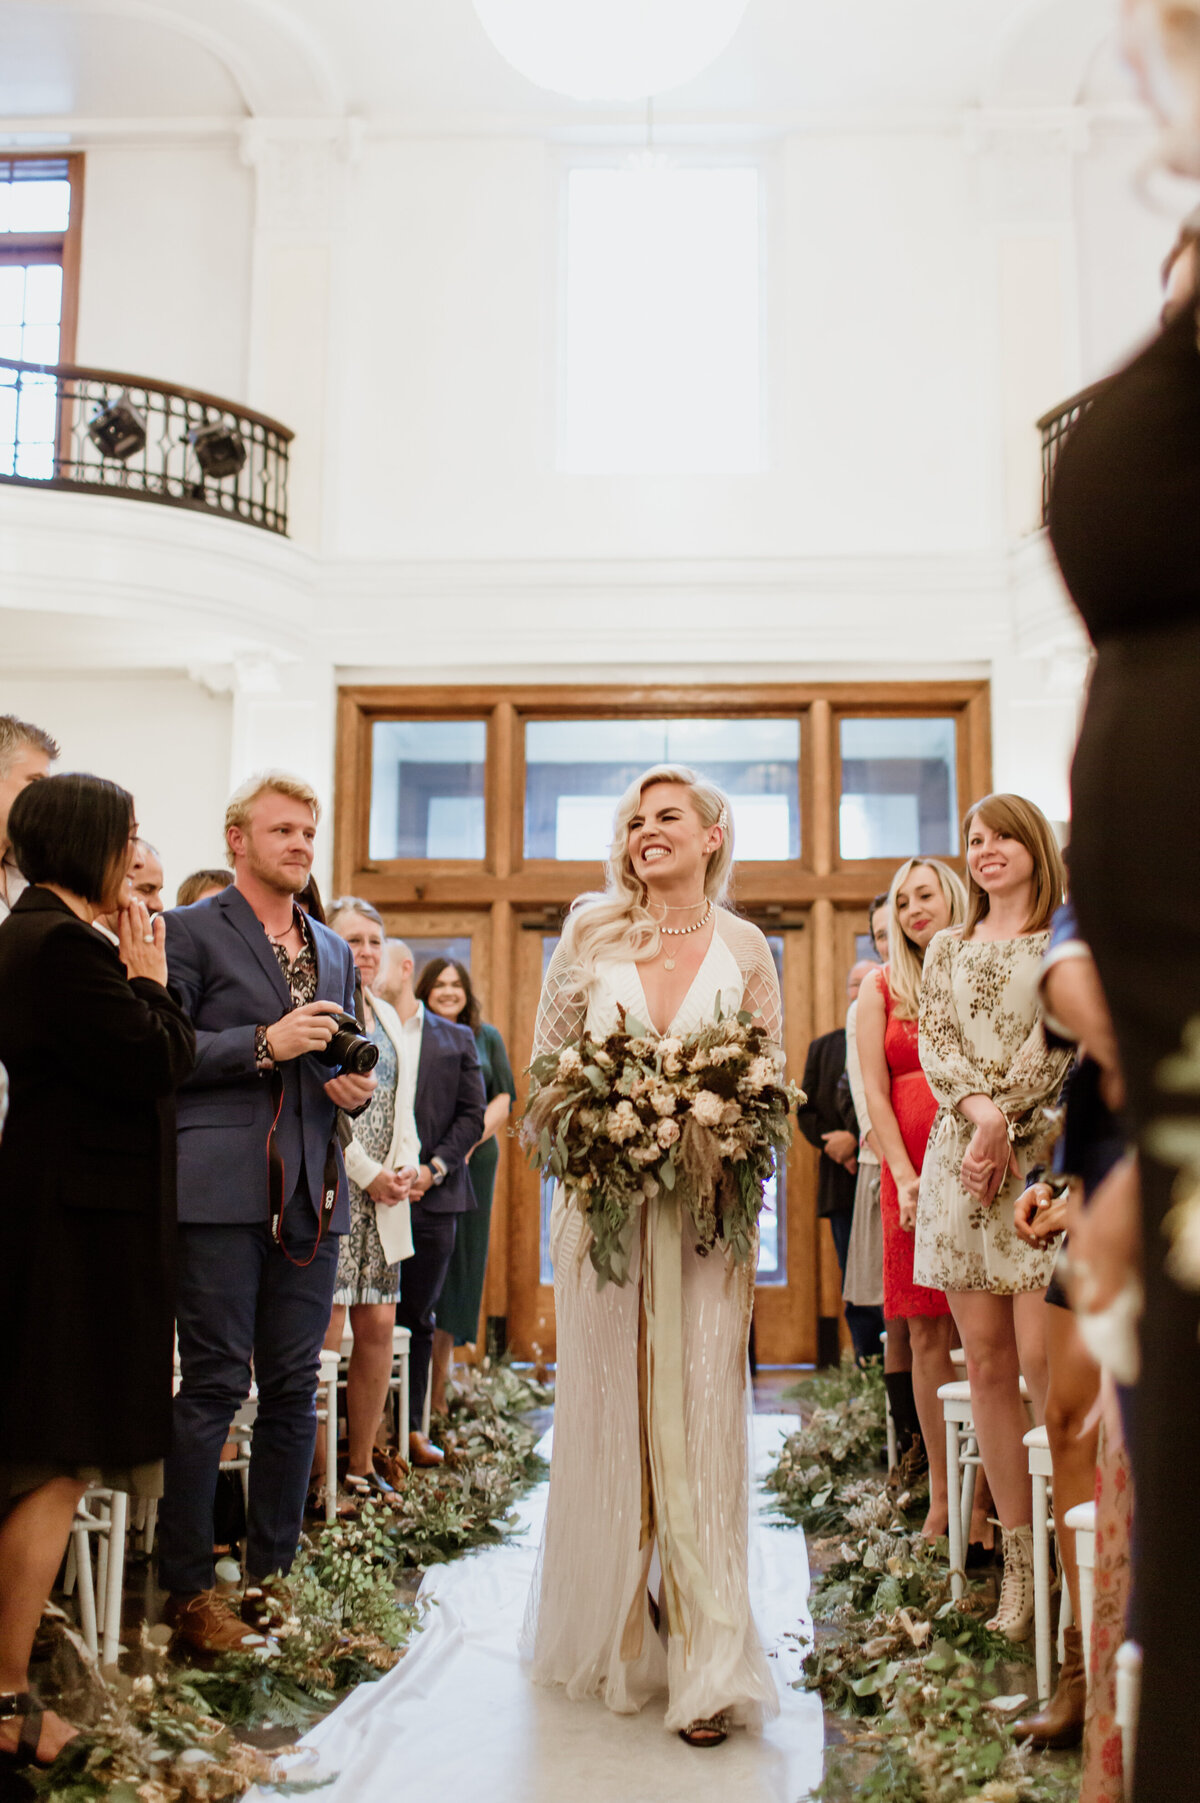 A beautiful beaming bride walking down the aisle captured by Fort Worth wedding photographer, Megan Christine Studio